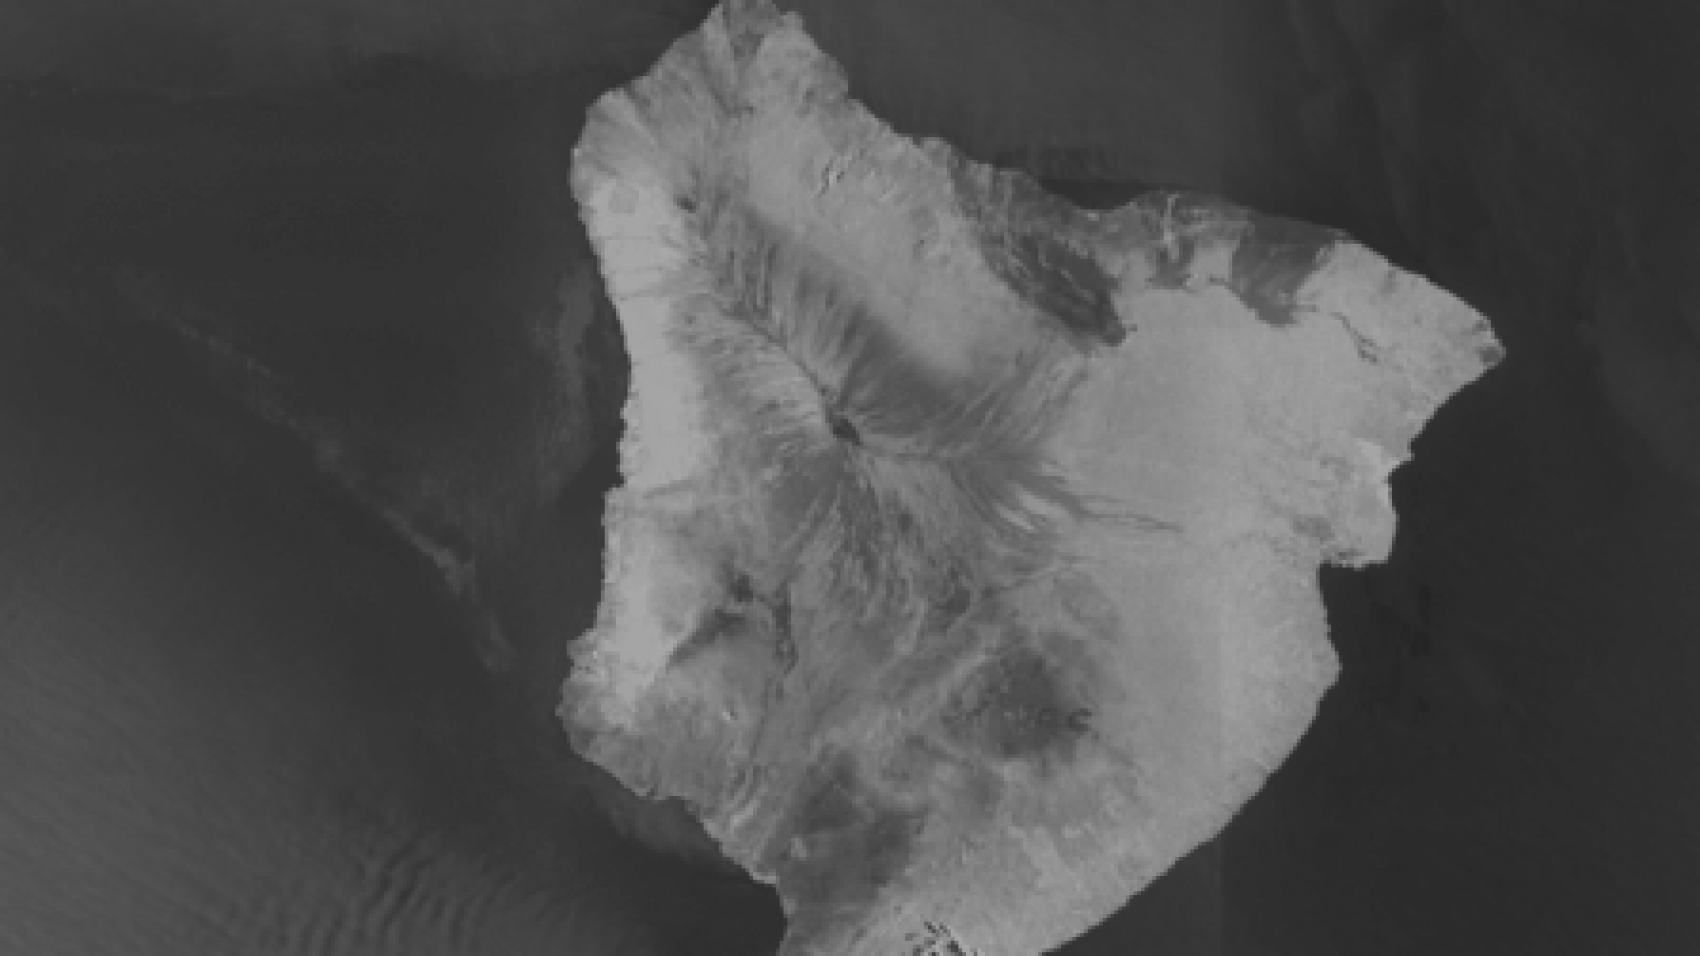 A Sentinel-1 image of Hawaii's Big Island before subsetting. Credit: Copernicus
Sentinel data 2018, processed by ESA.